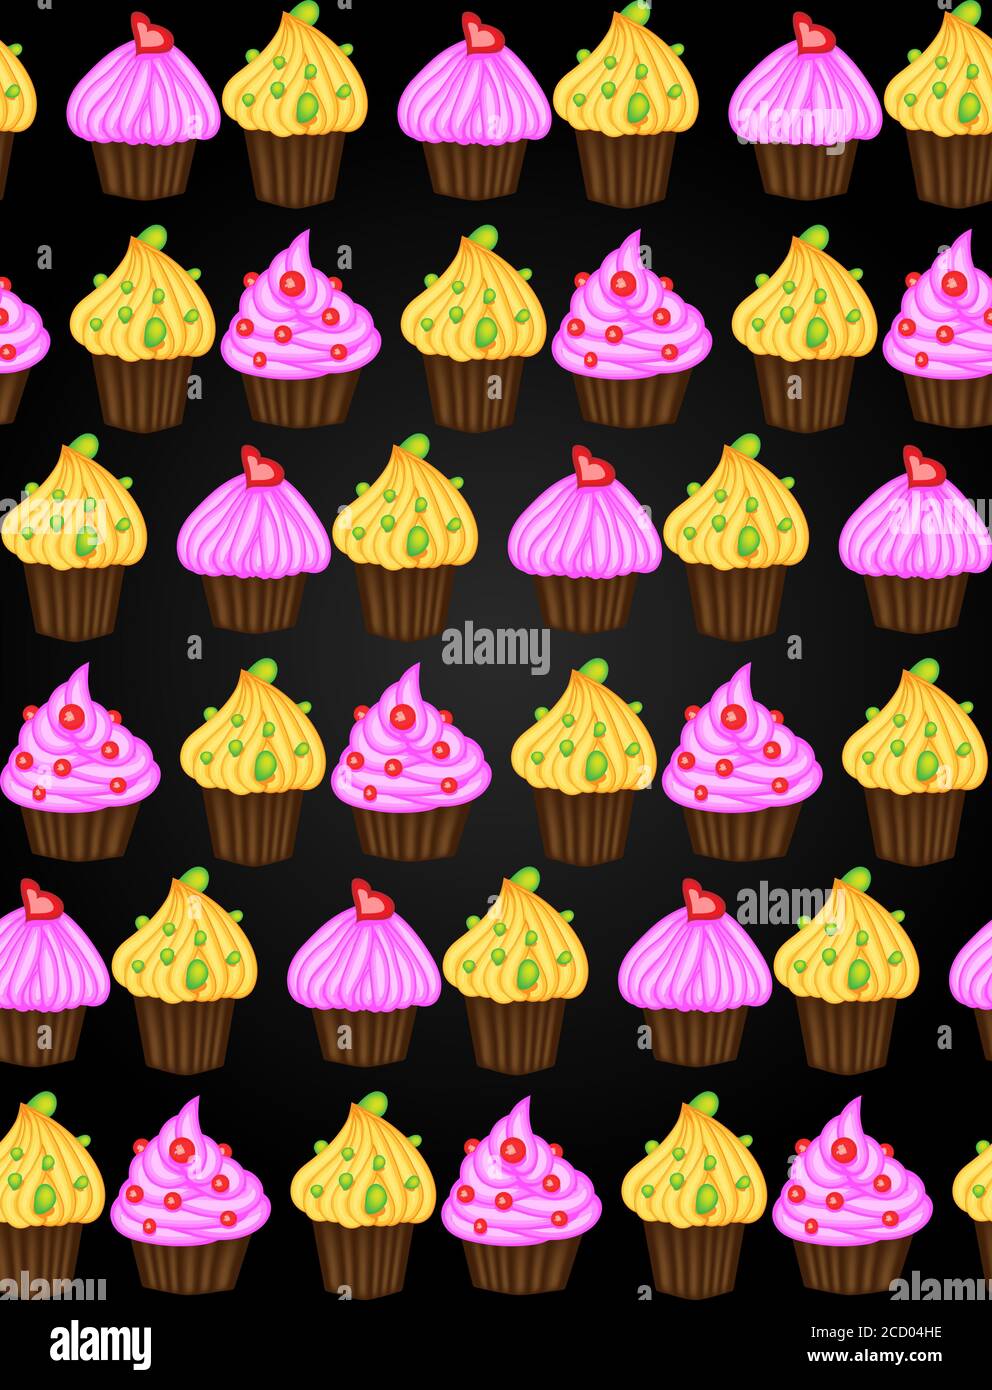 Birthday Background Seamless Pattern With Cupcakes And Muffins Cute Cartoon Characters Emoji Kawaii Cupcakes Stock Vector Image Art Alamy